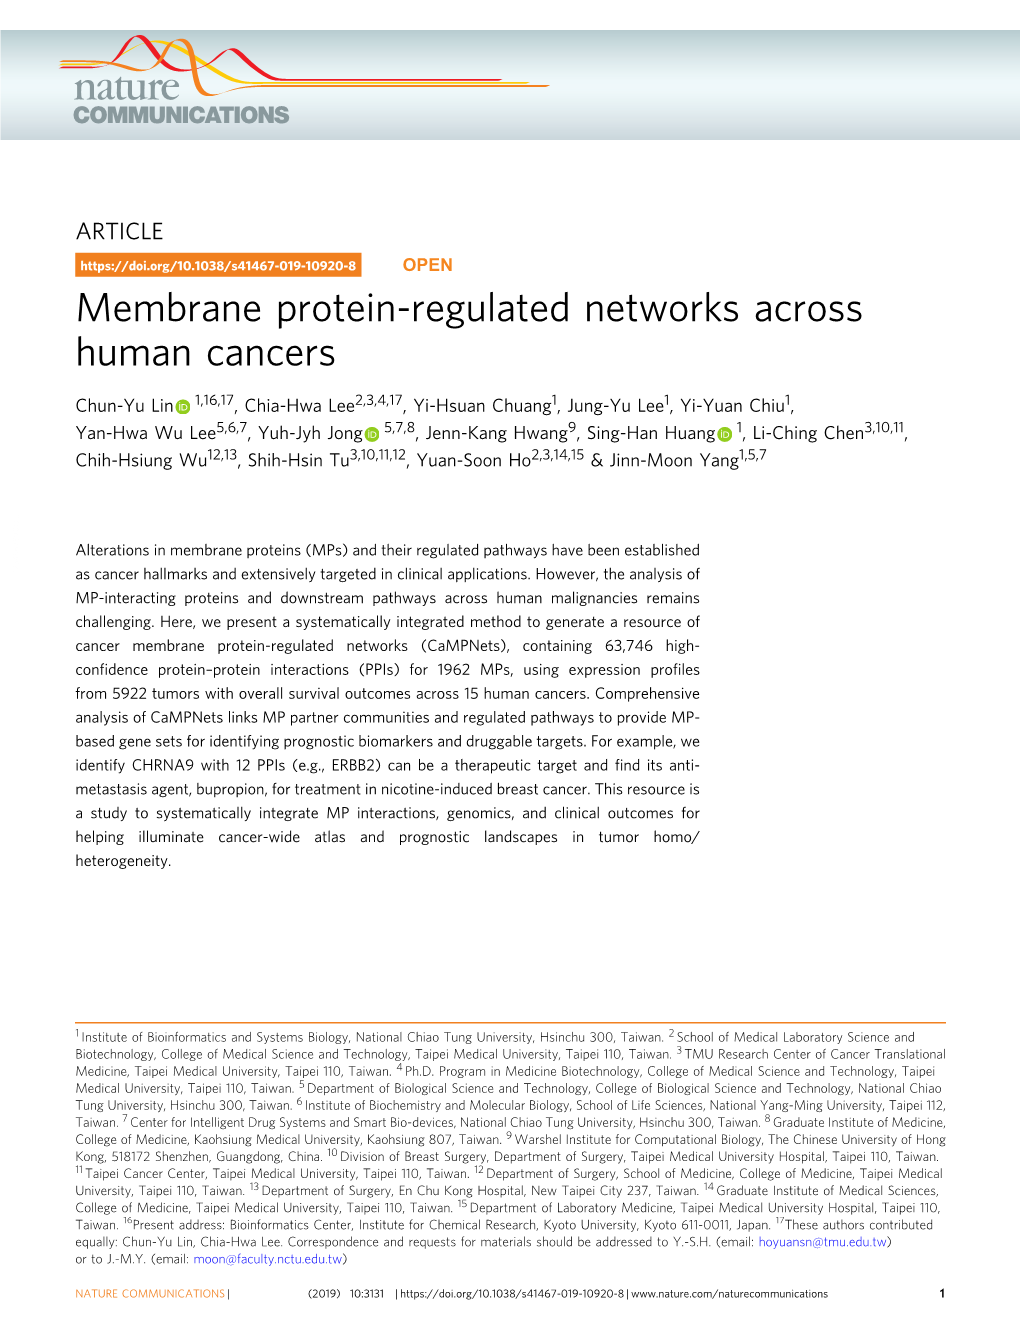 Membrane Protein-Regulated Networks Across Human Cancers